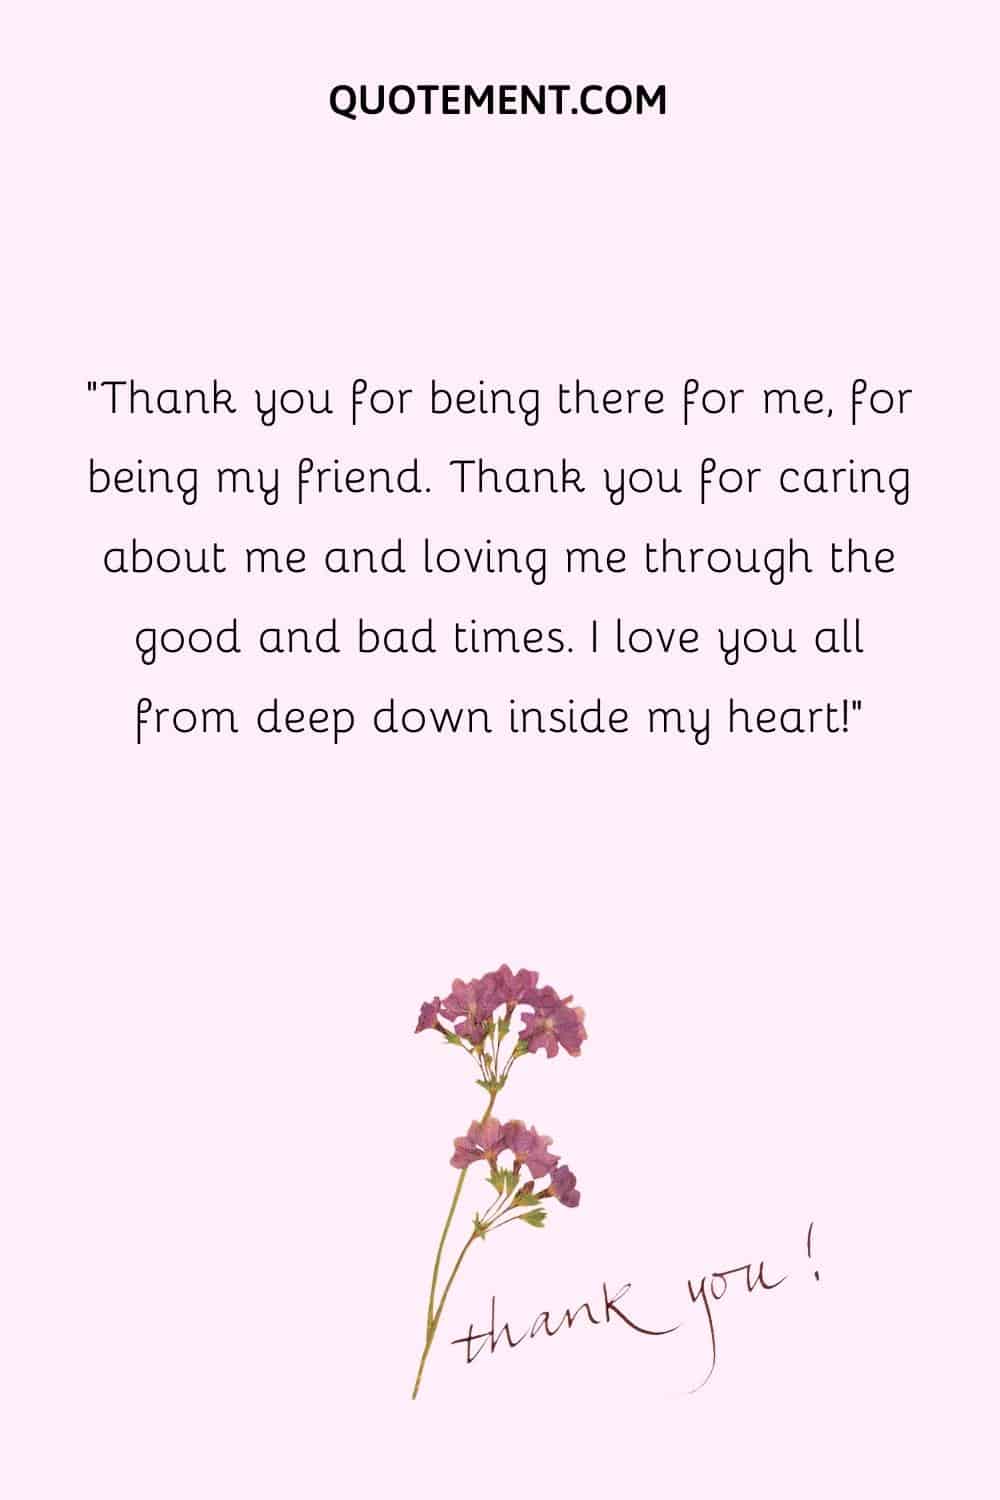 Thank you for being there for me, for being my friend. Thank you for caring about me and loving me through the good and bad times. I love you all from deep down inside my heart!